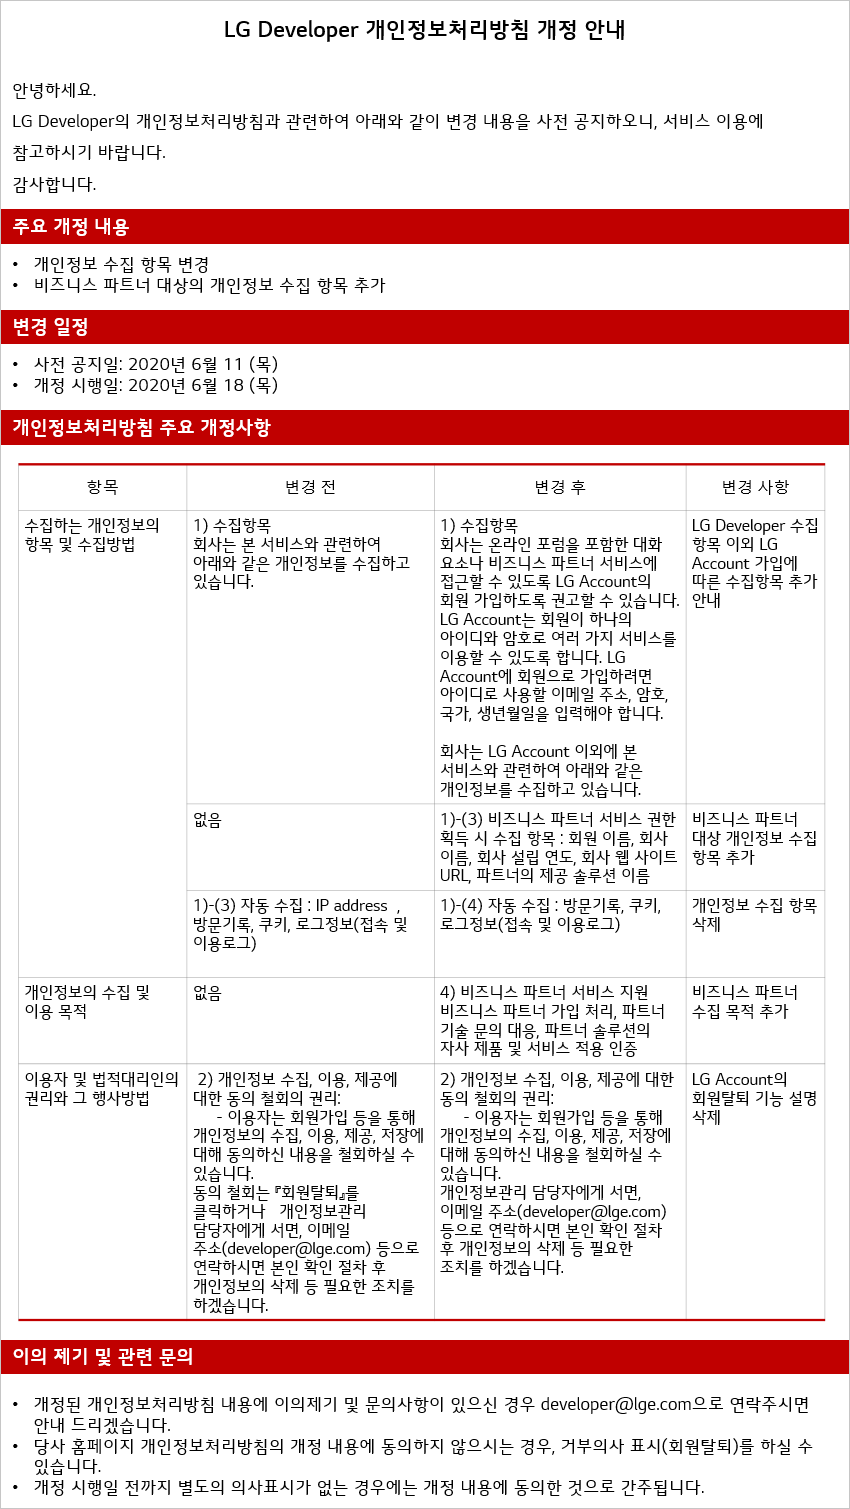 Privacy Policy News_Korean_202006.png